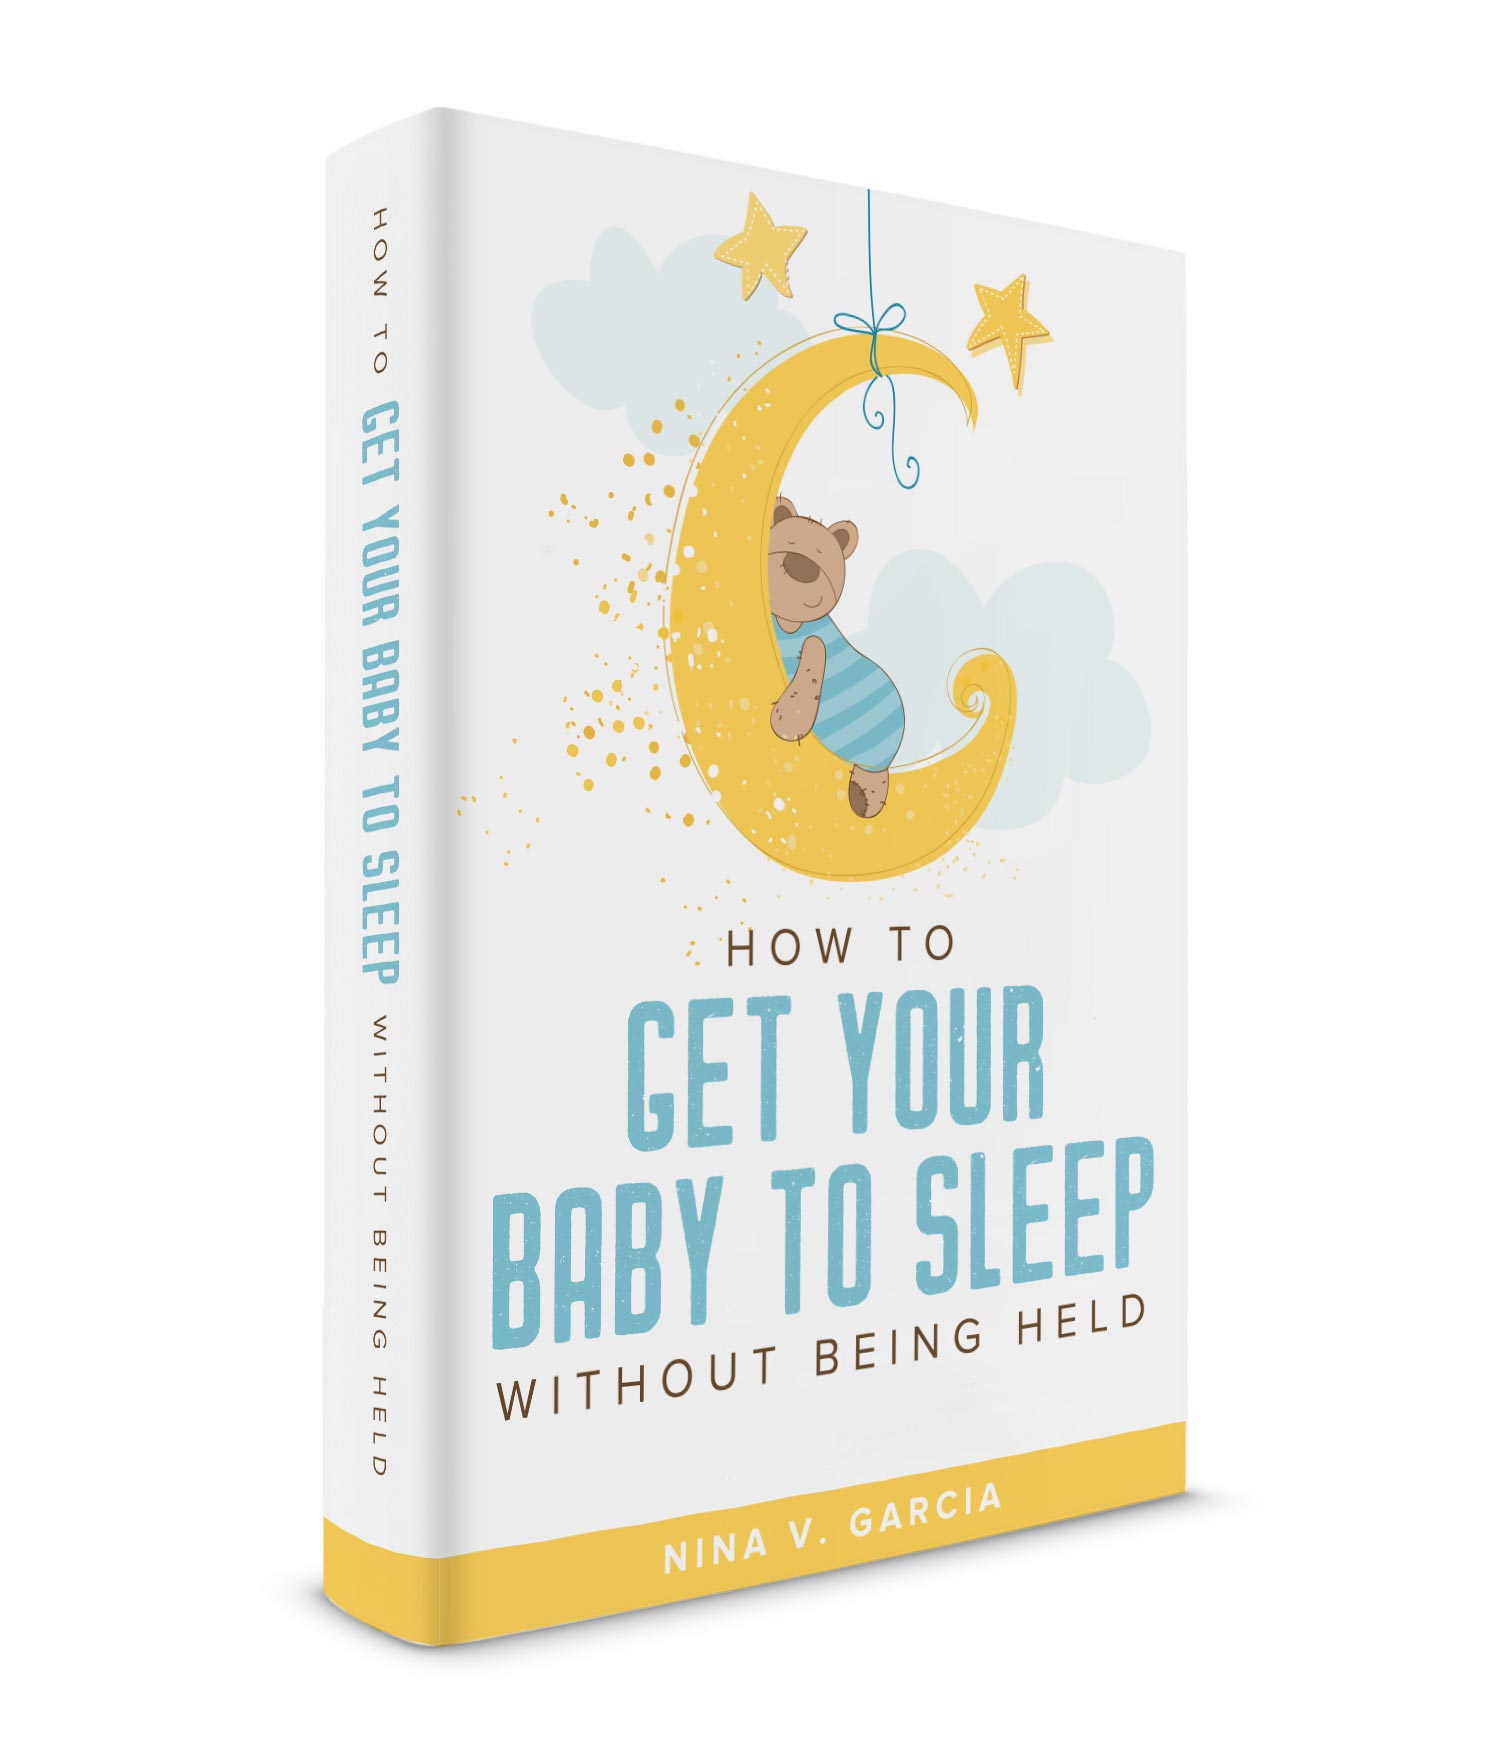 Top 17 Best Sleep Training Books for Babies Reviews in 2022 2